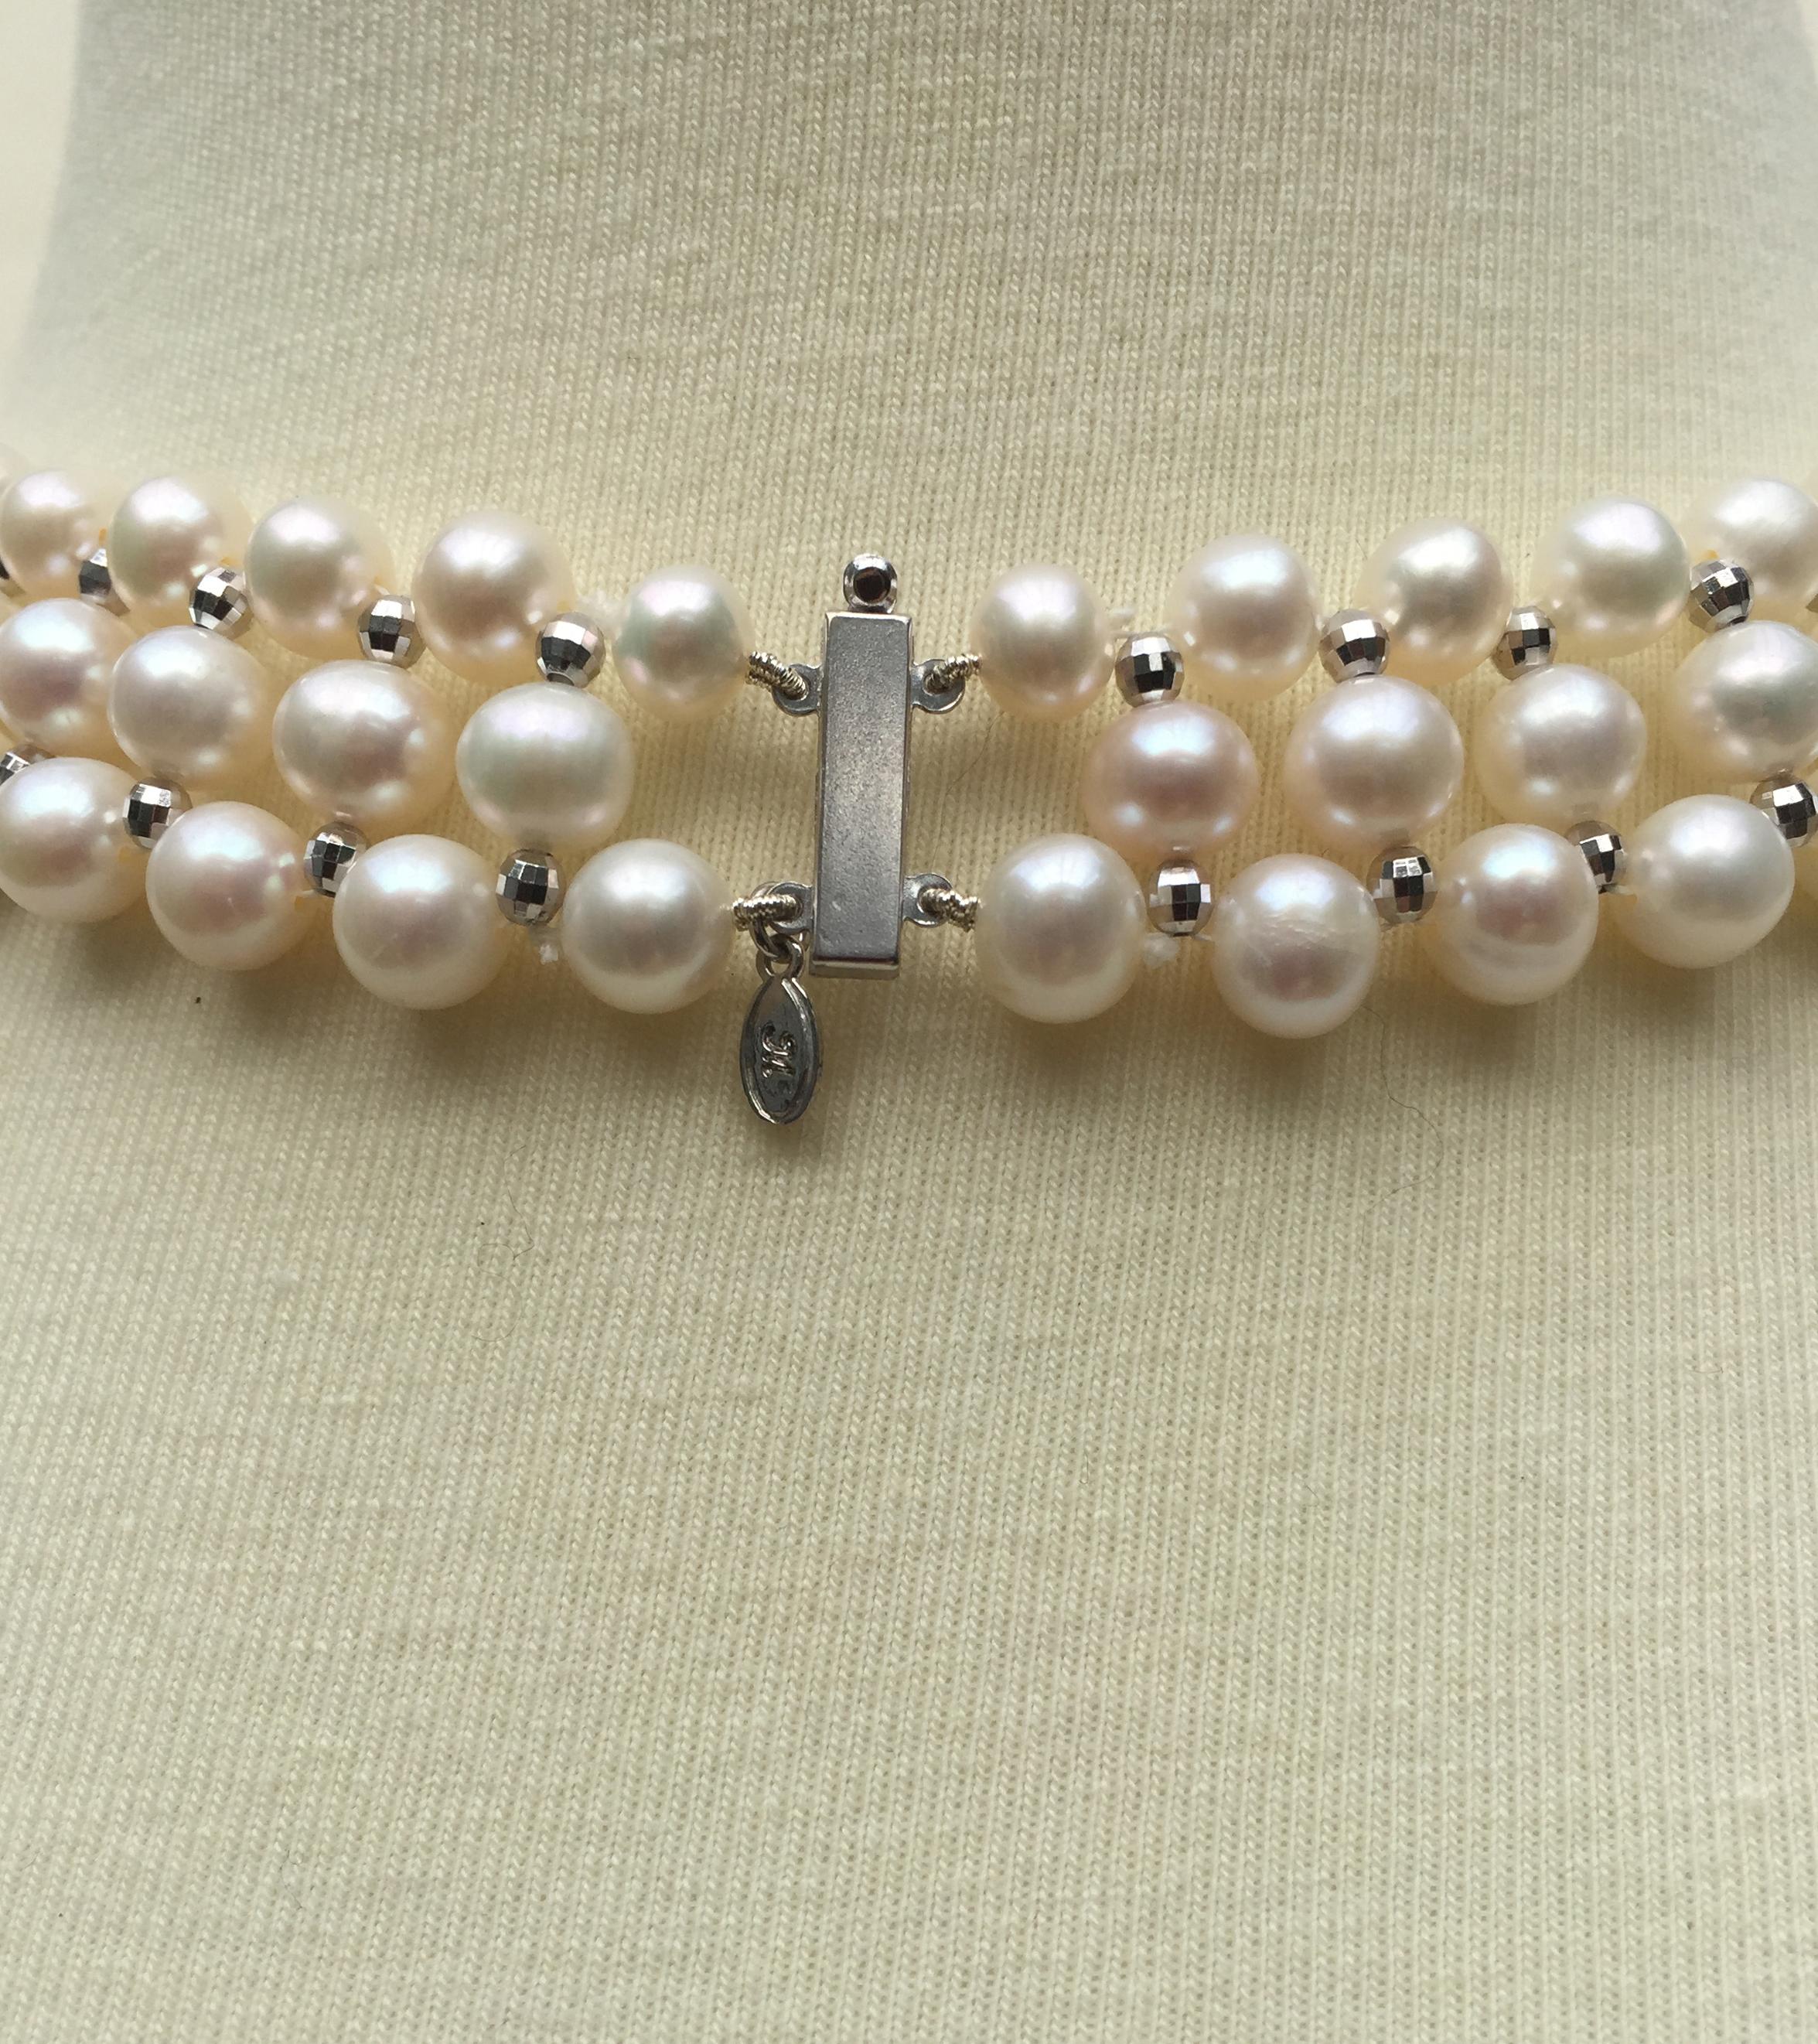 Artist Woven White Pearl Necklace with 14 Karat Gold Faceted Beads and Sliding Clasp